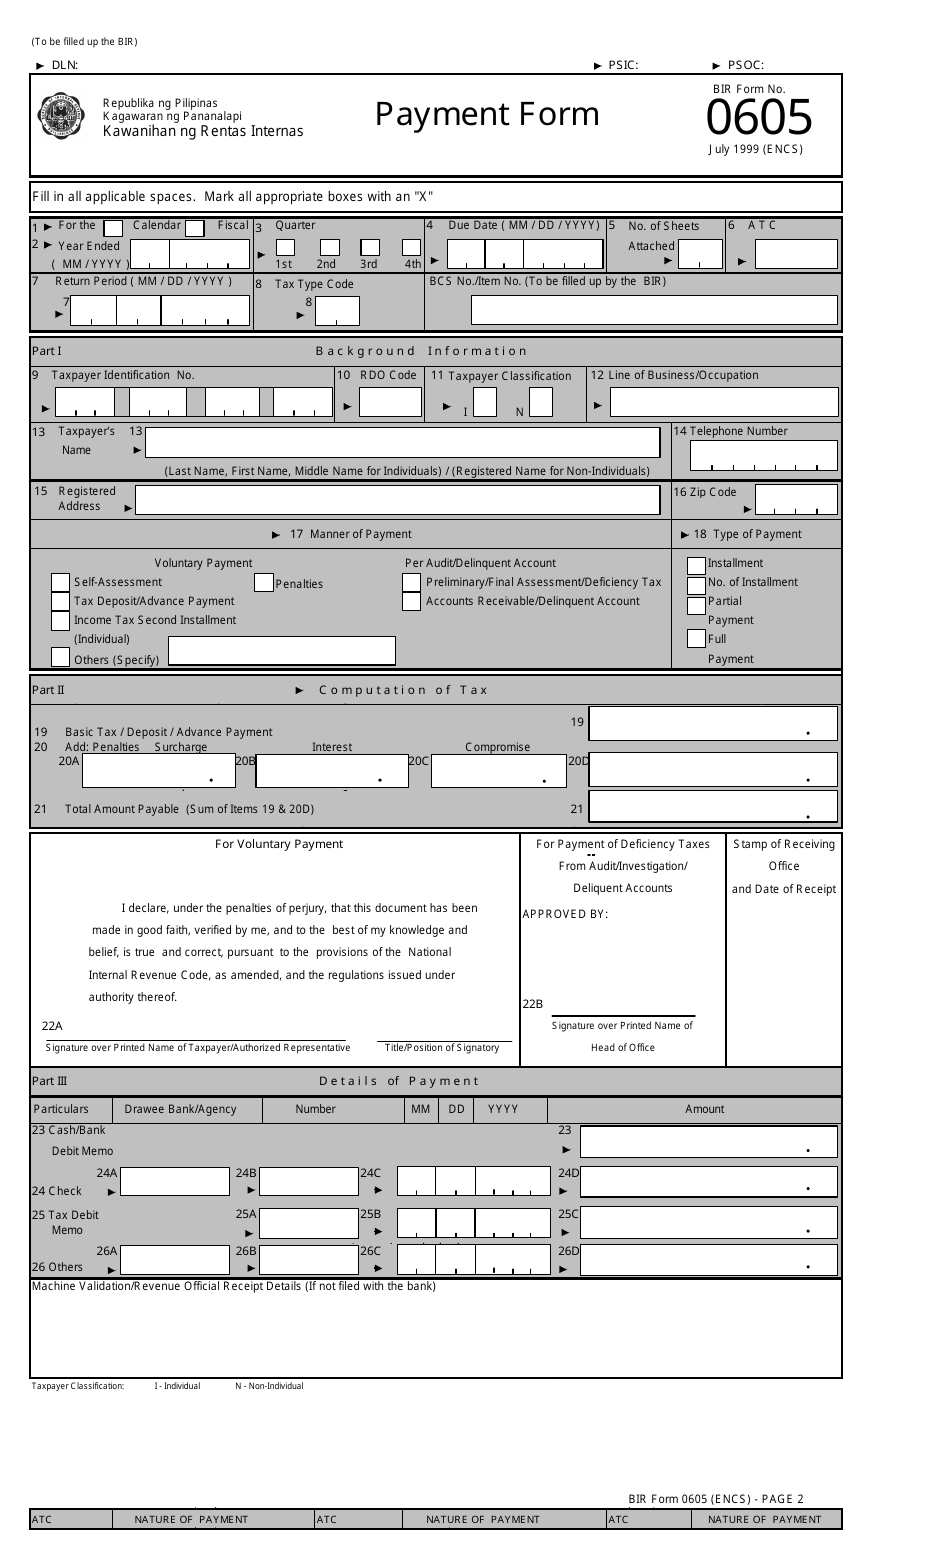 BIR Form 0605 Payment Form - Philippines, Page 1